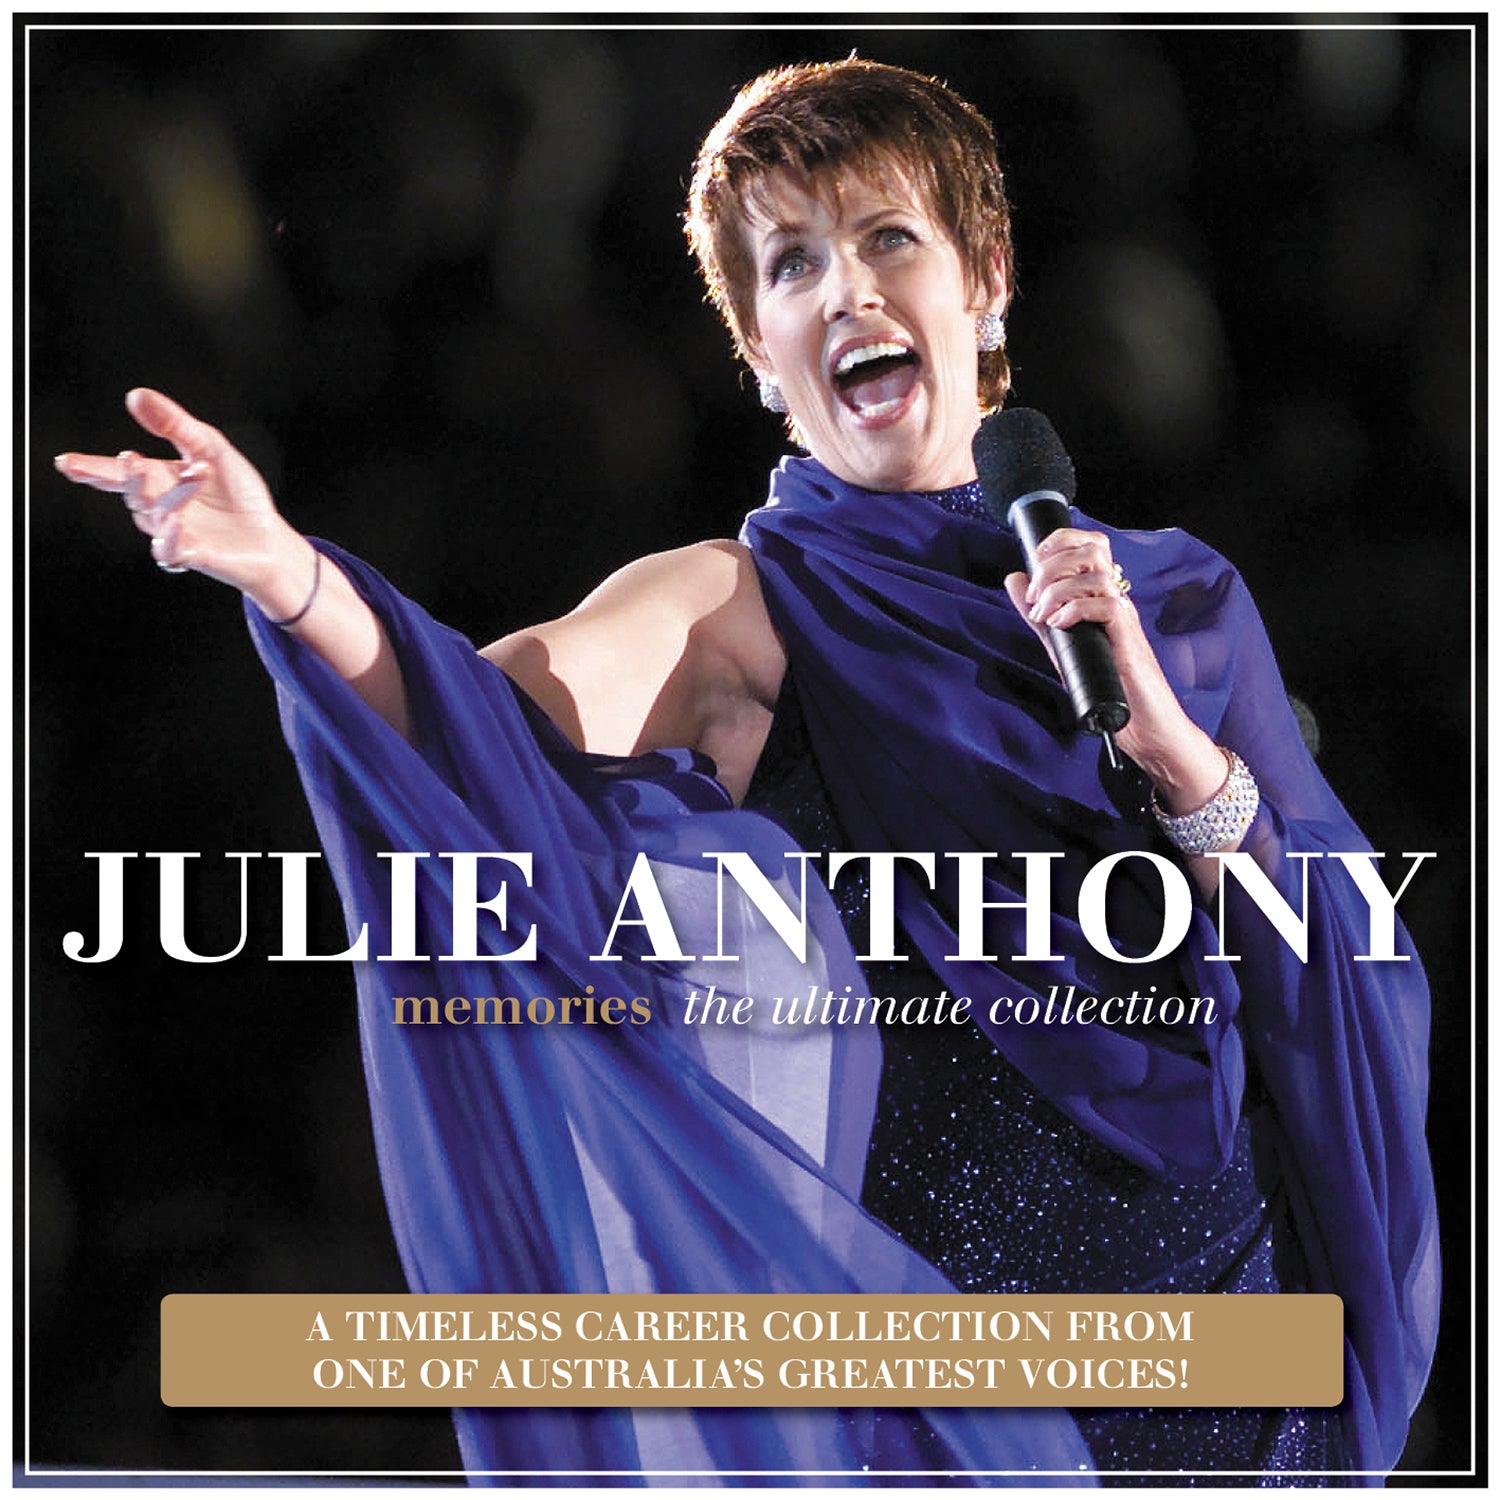 JULIE ANTHONY - MEMORIES, THE ULTIMATE COLLECTION